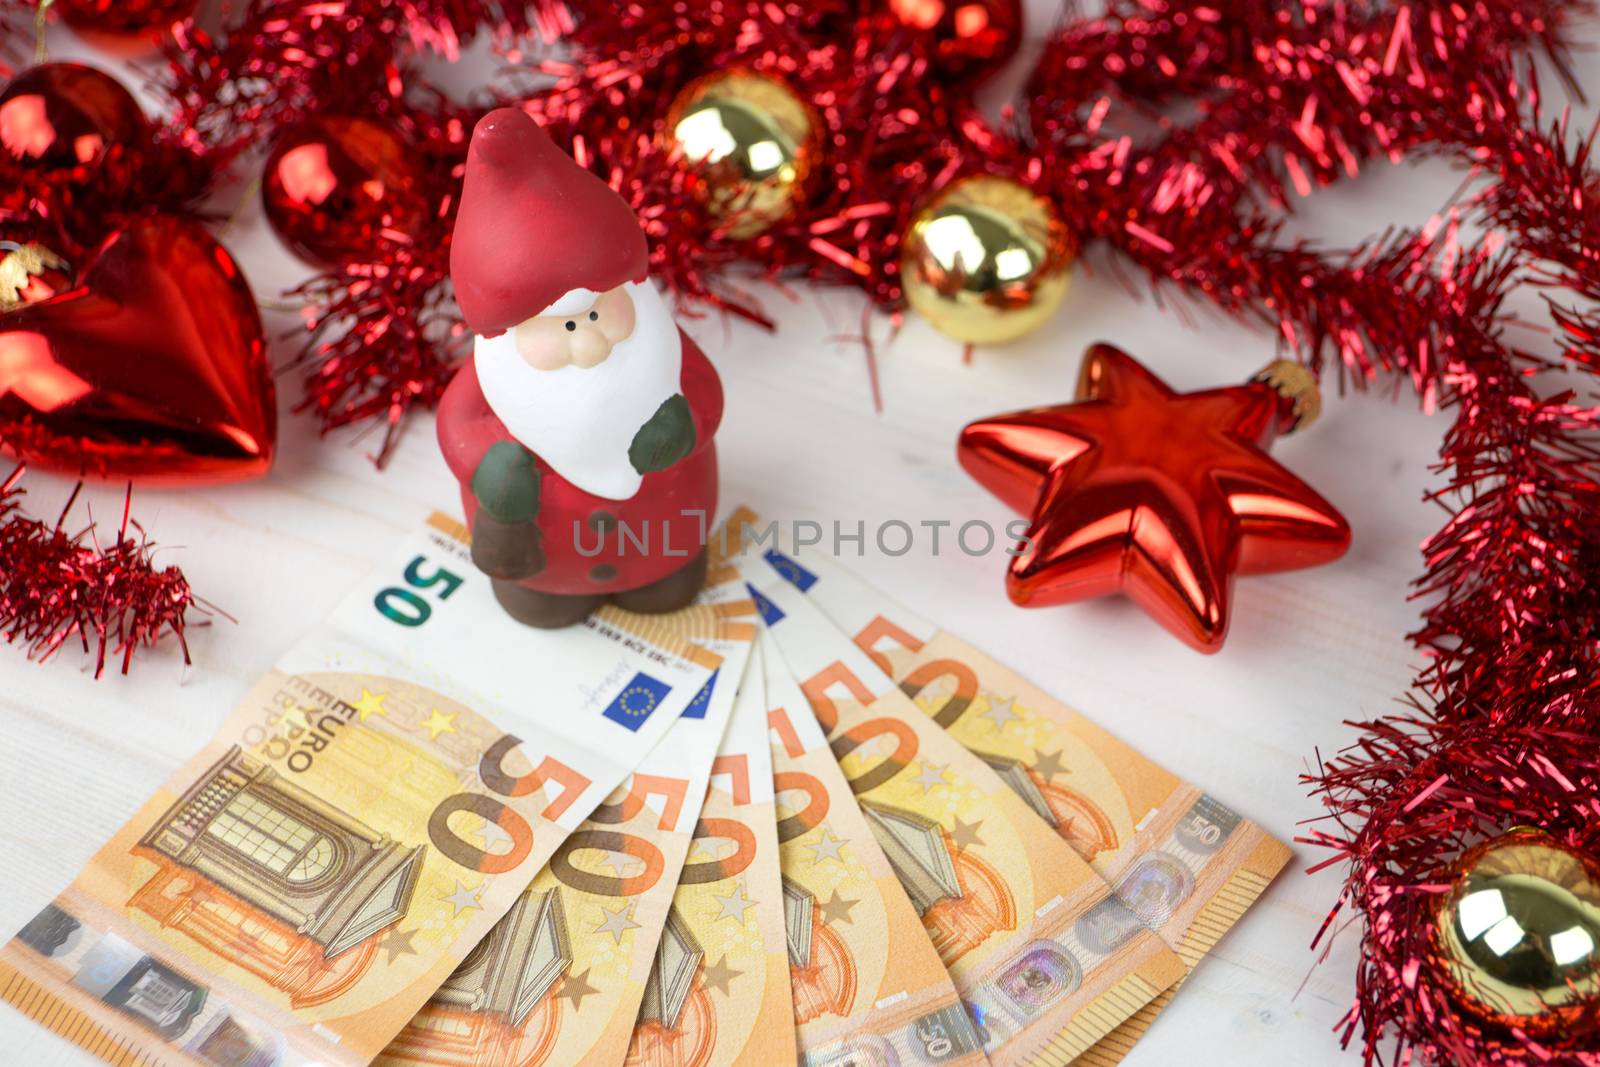 Christmas money business concept: a statuette of Santa Claus on some fifty euro banknotes with red and gold baubles and wreath decoration on light wooden table